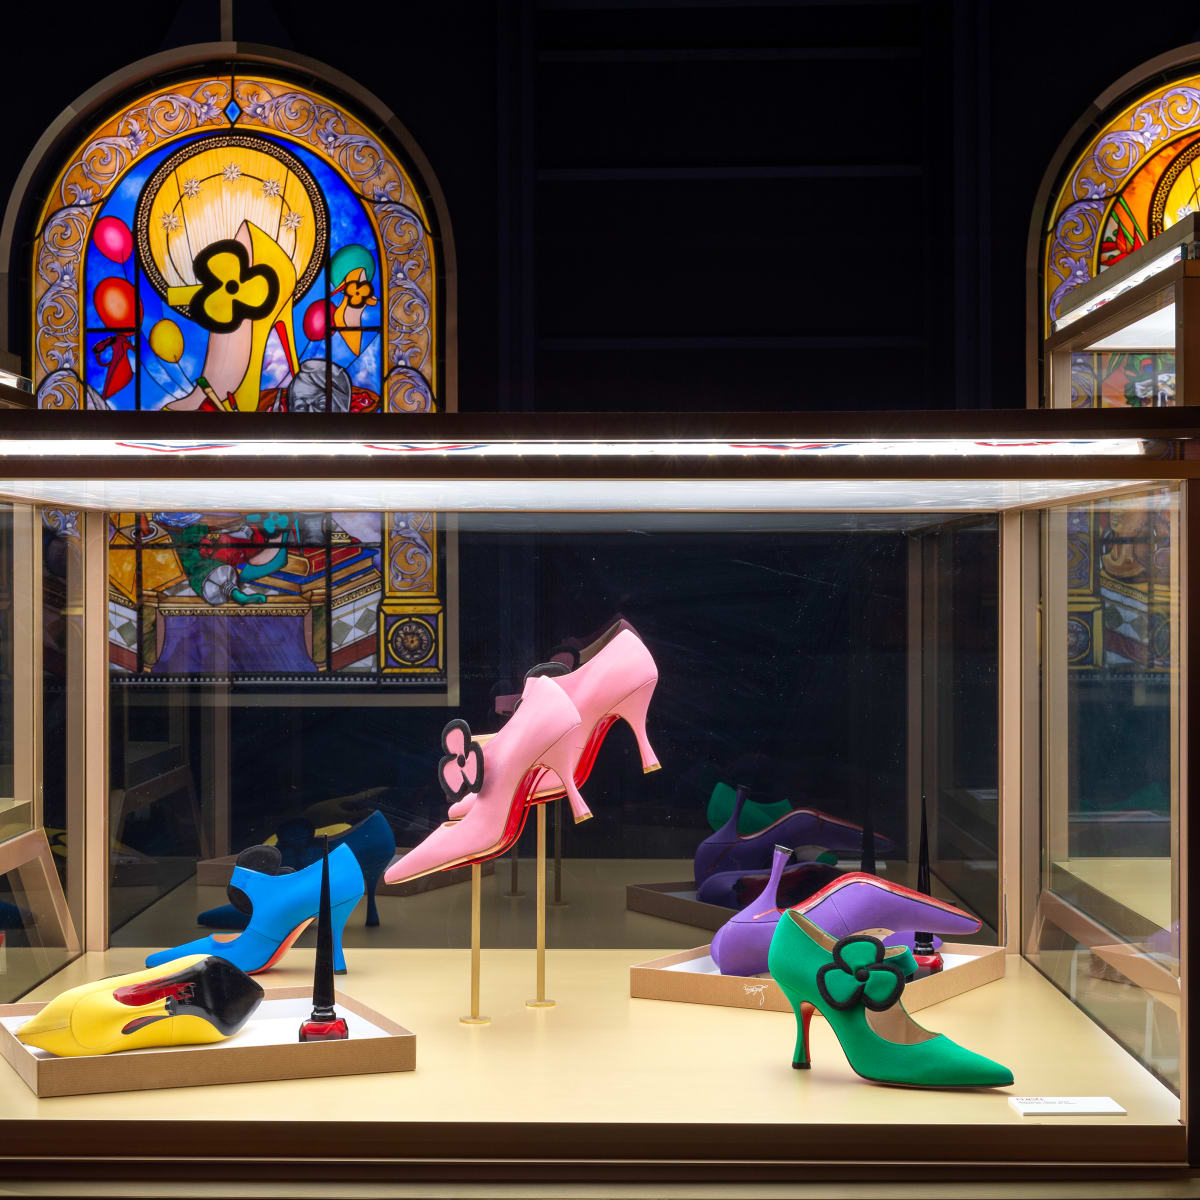 Christian Louboutin's New Paris Exhibit Looks Beyond Red and Into Man Behind - Fashionista